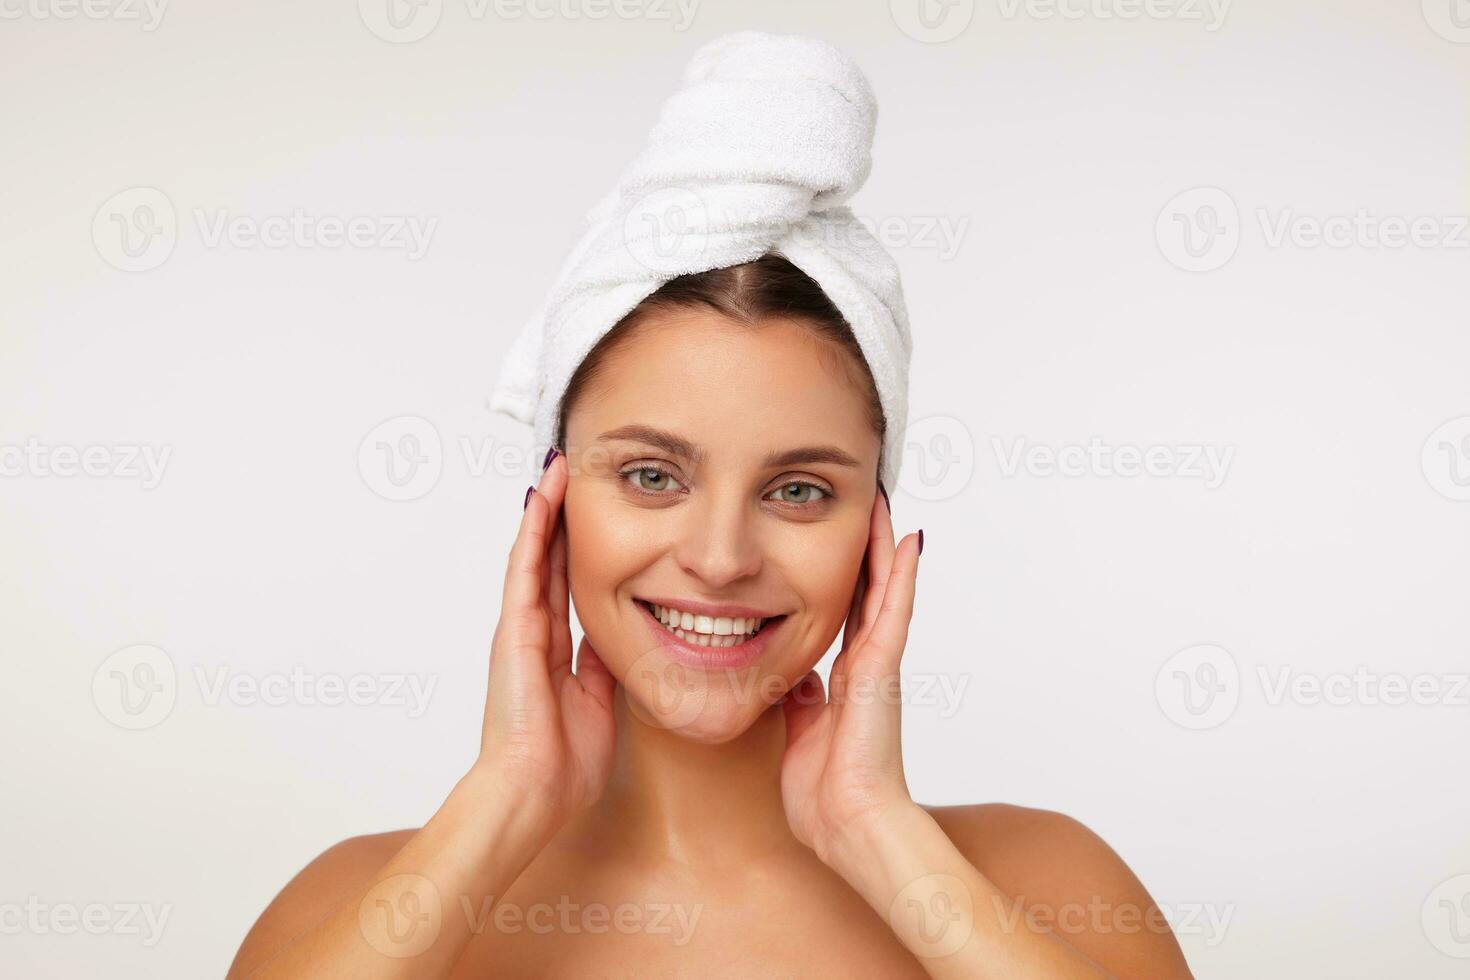 Closeup of attractive young lady with dark hair wrapped in bath towel touching her face with raised hands and looking cheerfully with broad smile, standing against white background photo